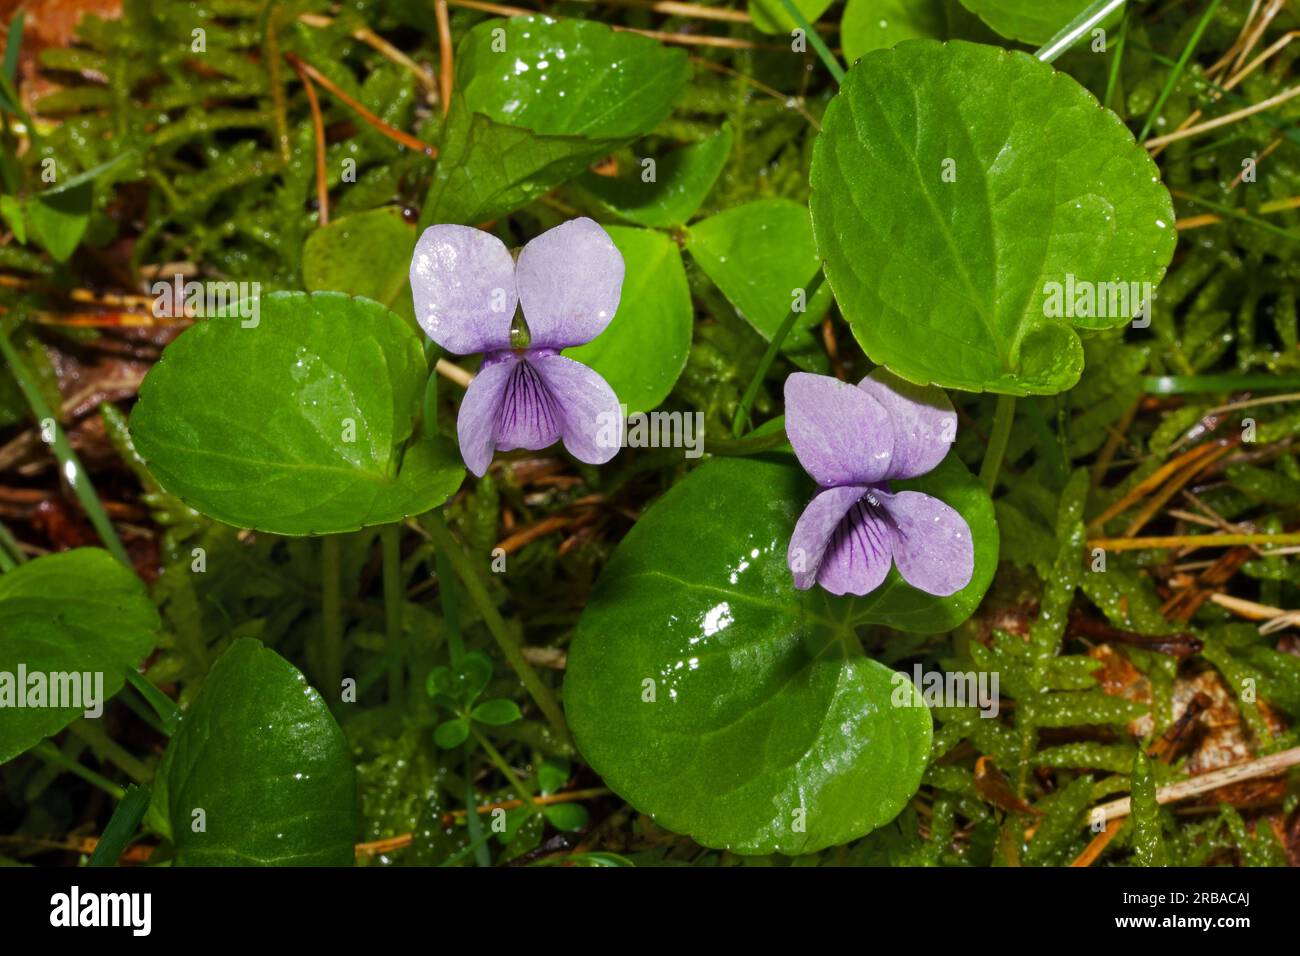 Viola palustris (marsh violet) inhabits moist meadows, bogs and marshes. It occurs across the Northern Hemisphere. Stock Photo